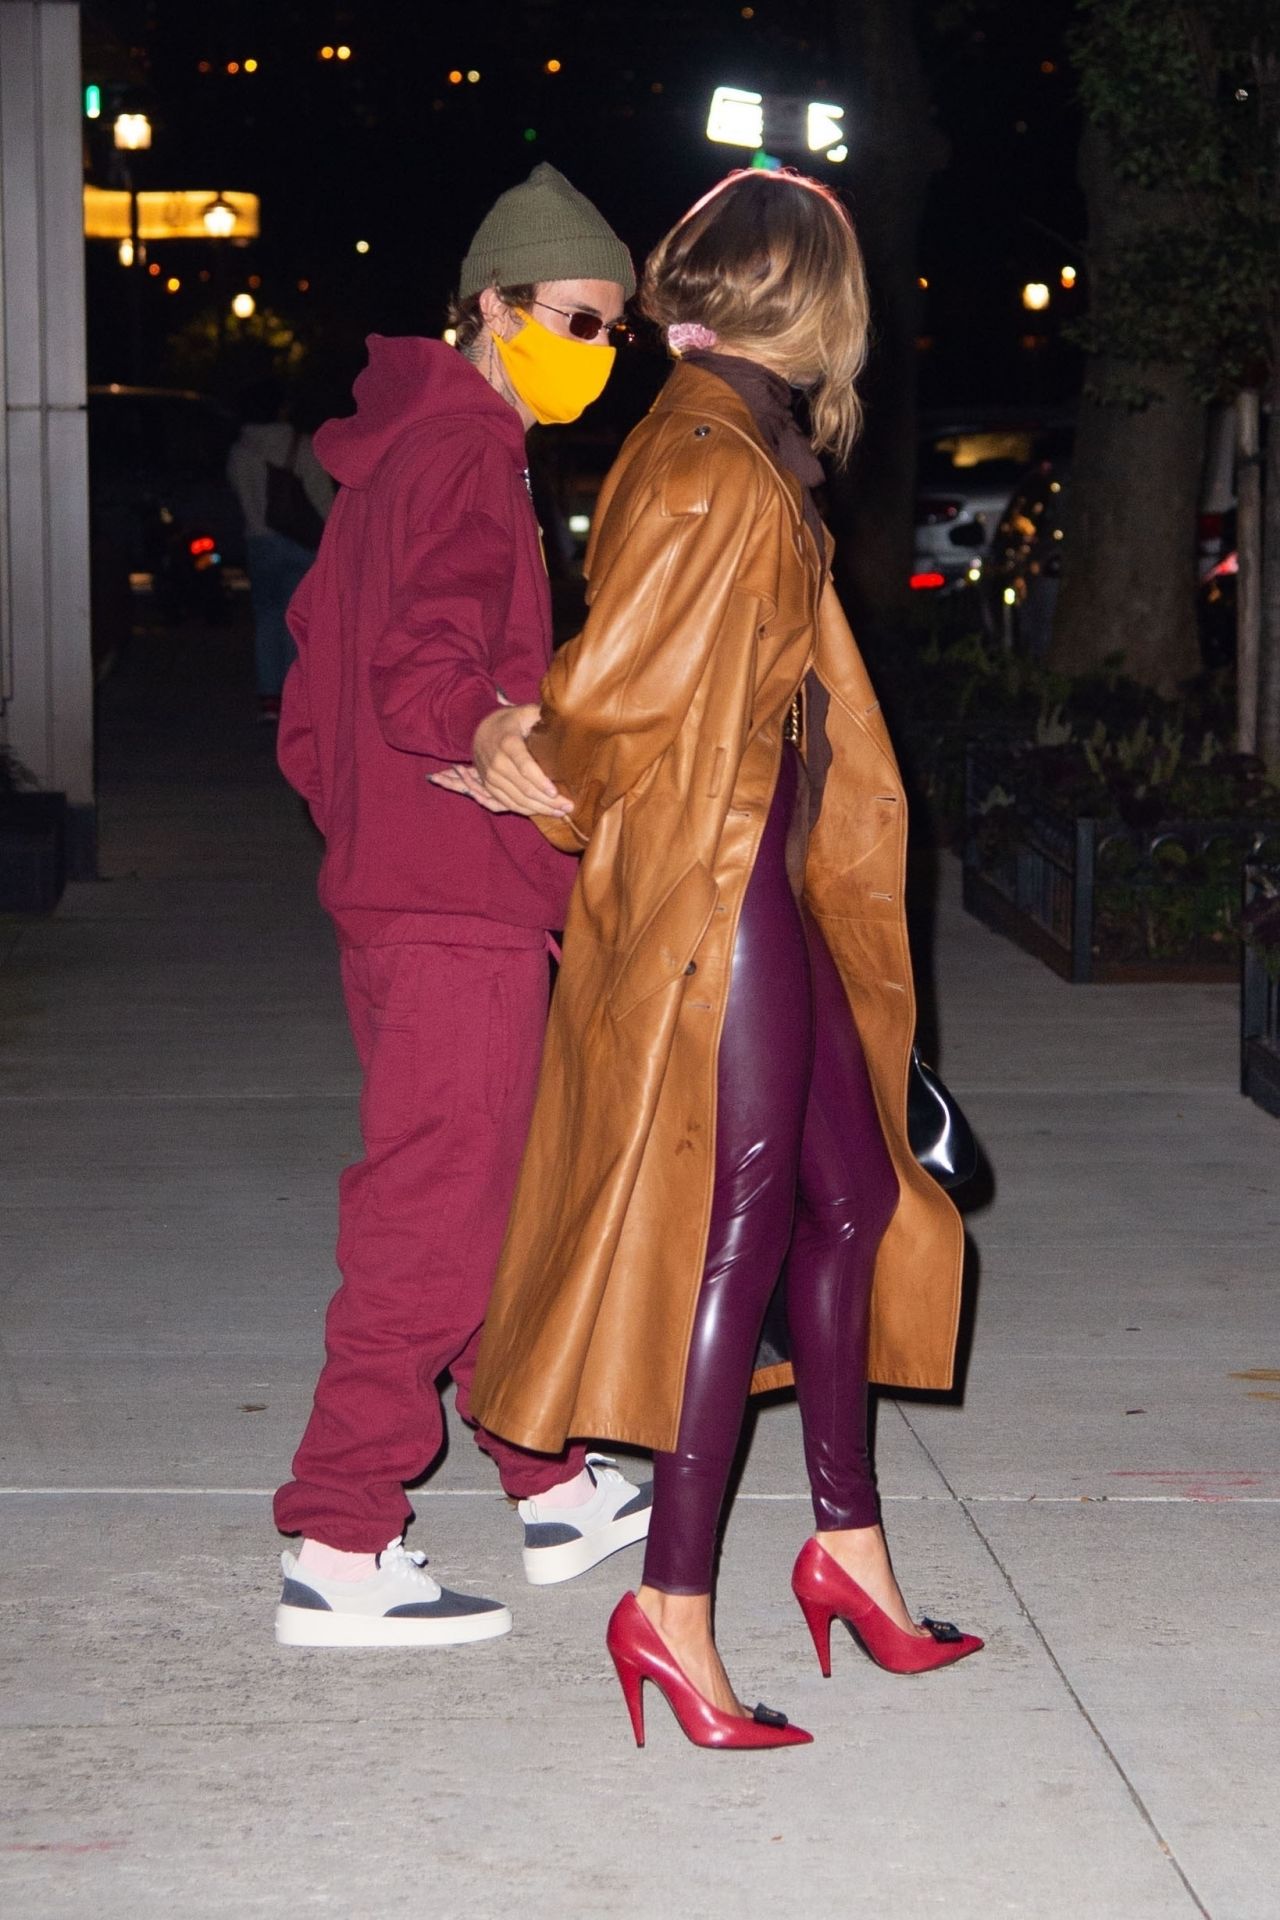 hailey-bieber-and-justin-bieber-night-out-new-york-city-10-15-2020-3.jpg